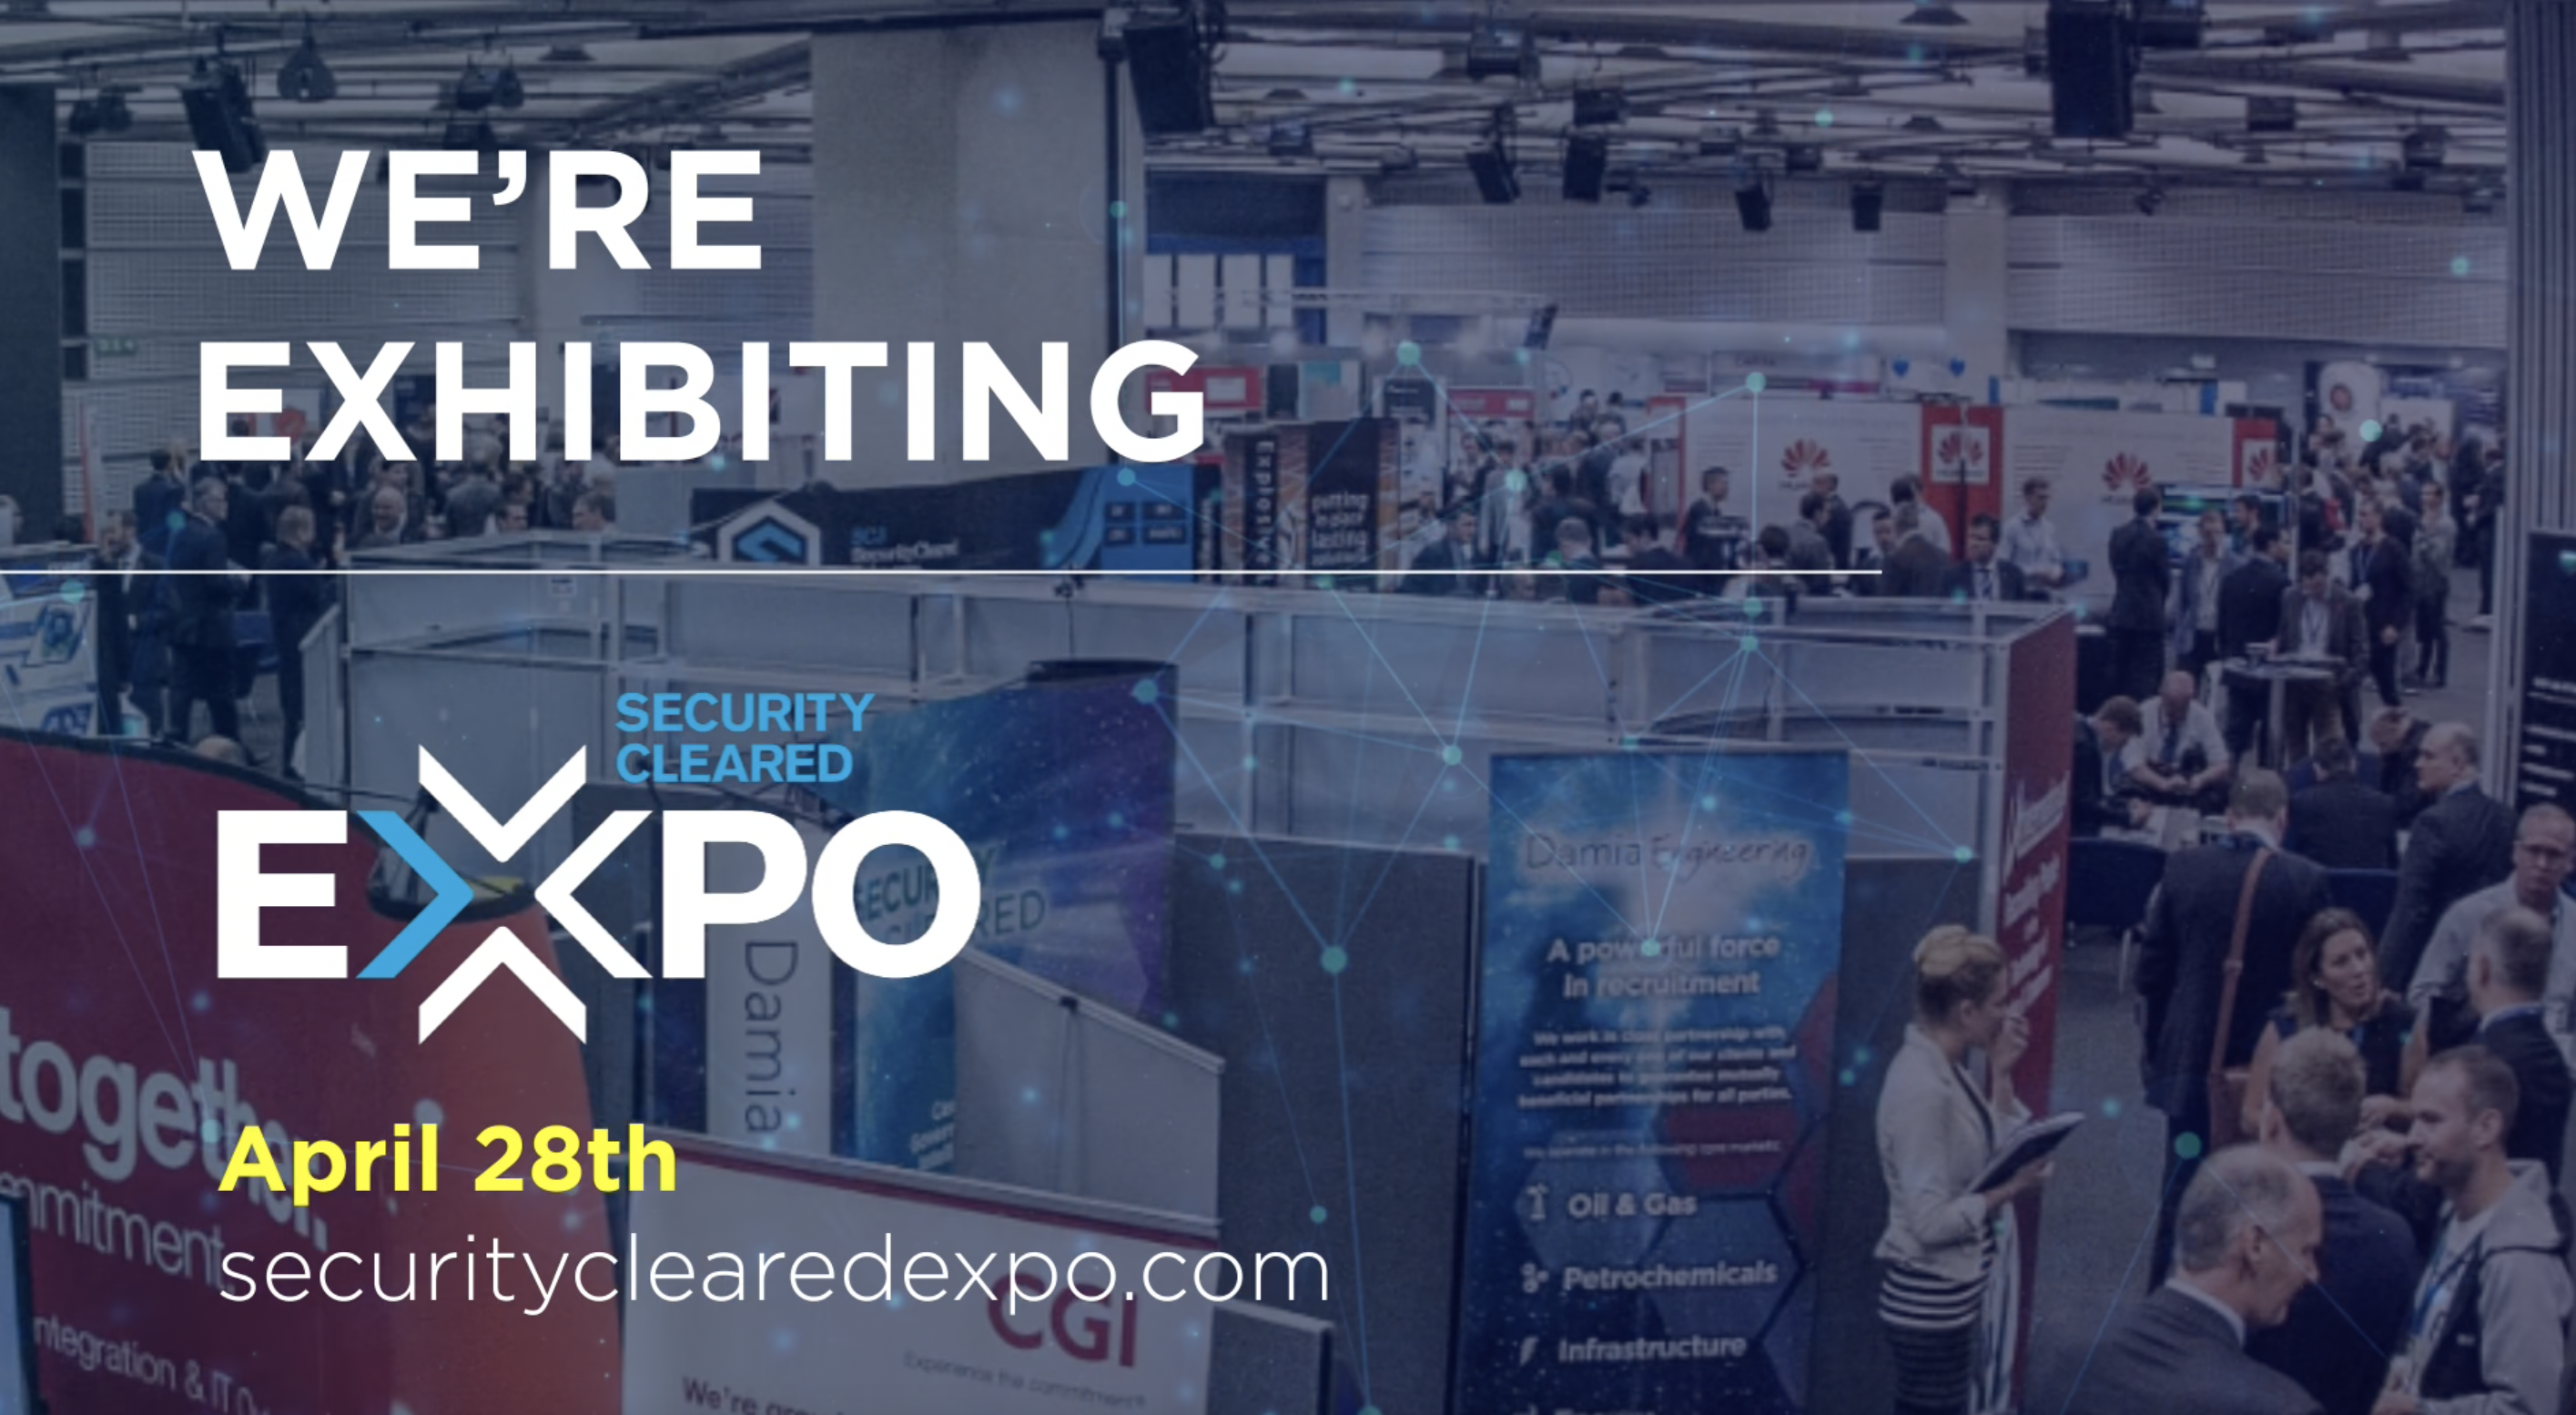 28th April: Security Cleared EXPO